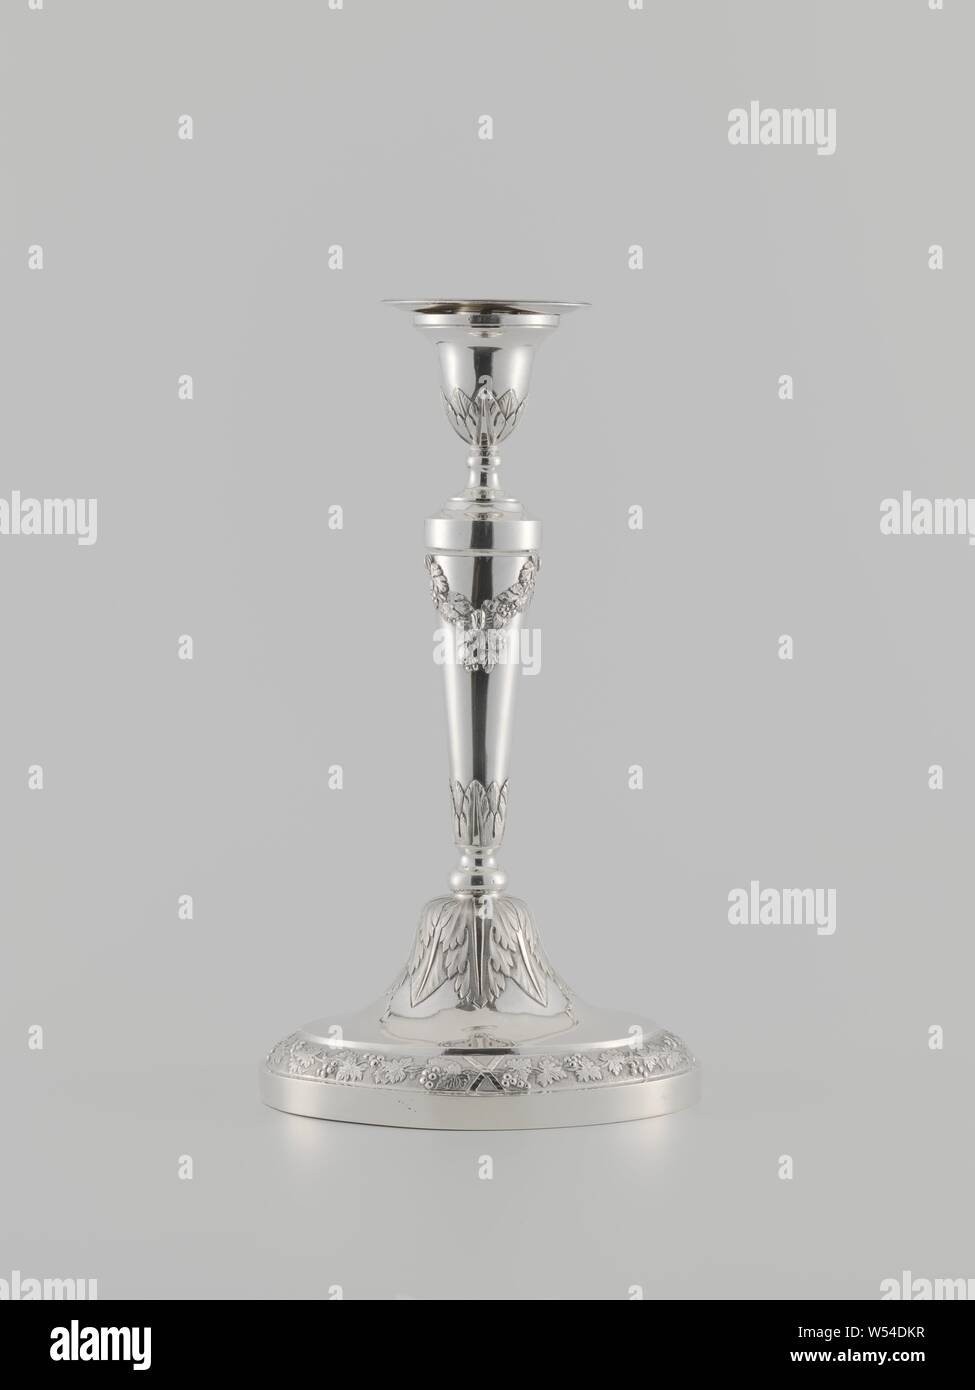 Candlestick, Candlestick with base. Marked and dated, foliage, ornament, vine, Isaac Jean Alexandre Gogel, Francois Marcus Simons, The Hague, 1803, silver (metal), founding, h 29.5 cm × w 16.5 cm × l 11.3 gr × w 486.0 Stock Photo